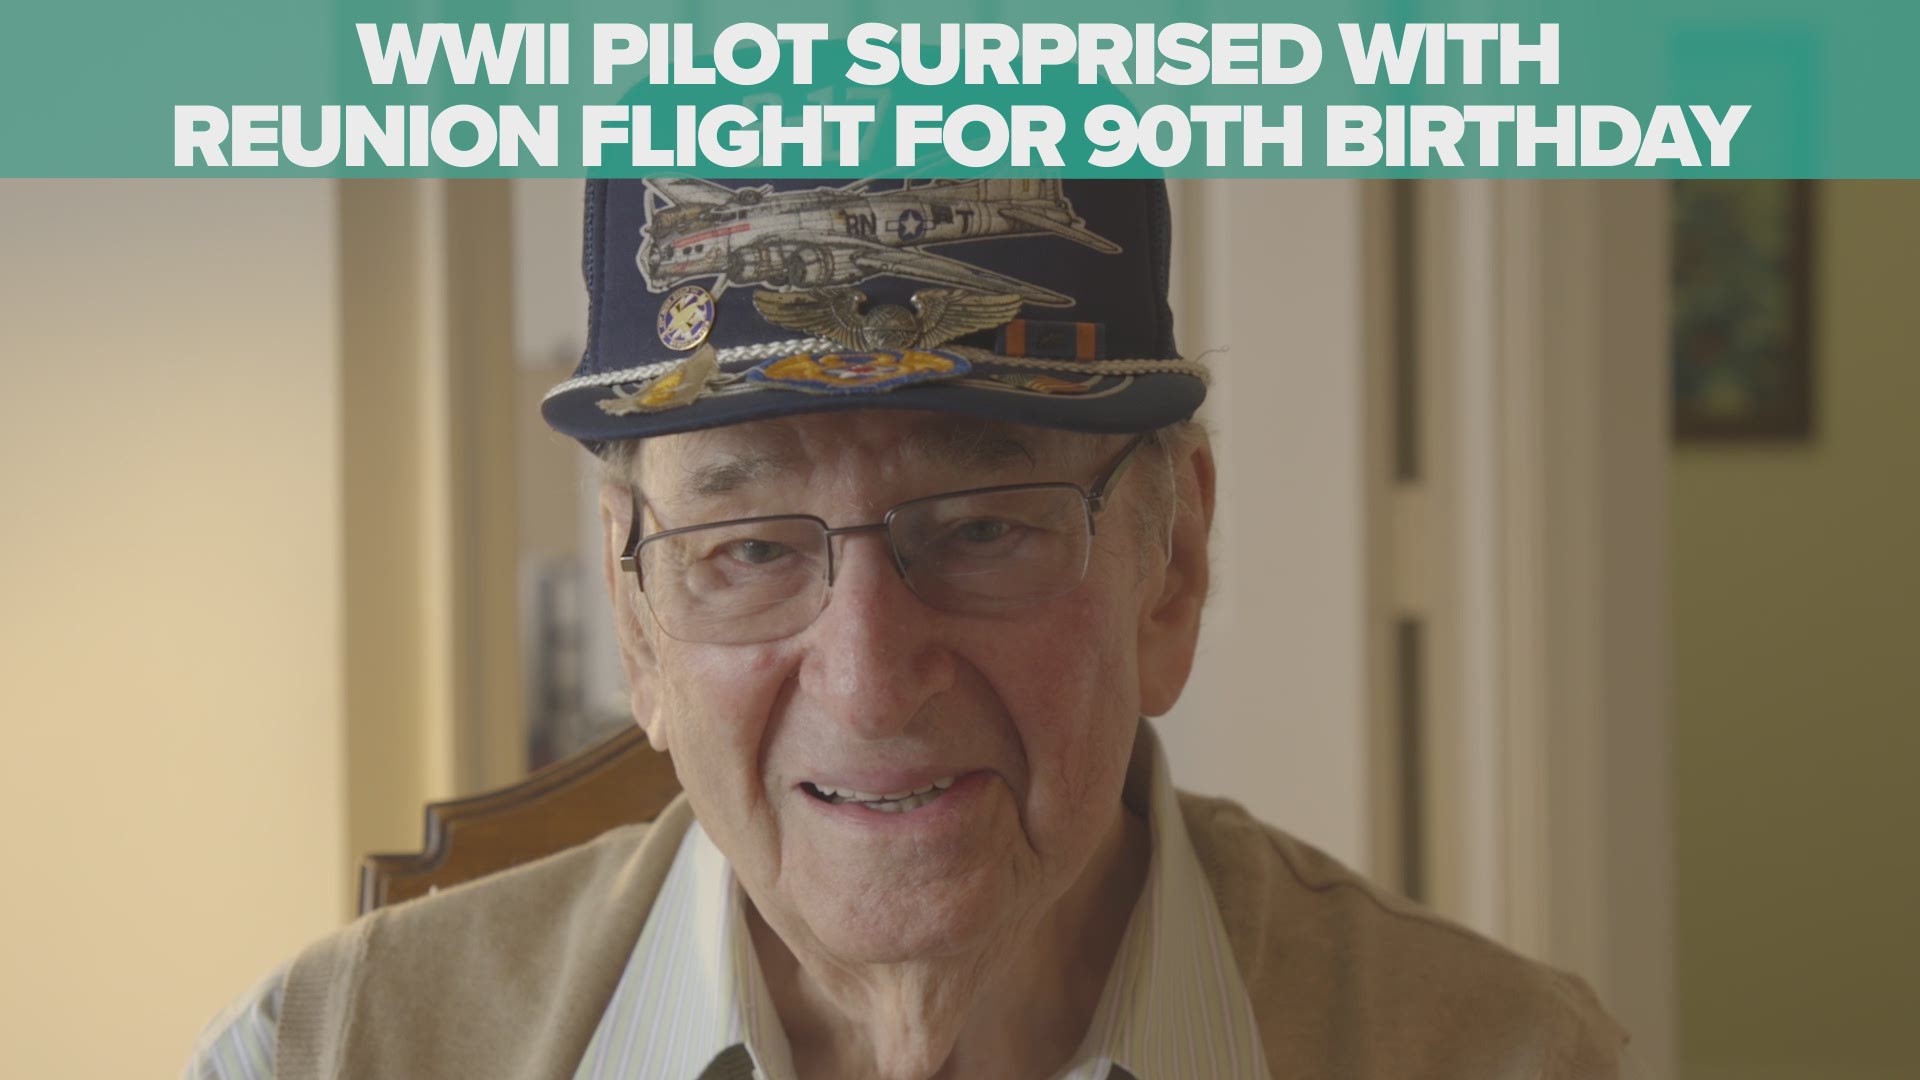 This WWII pilot got the surprise of a lifetime for his 90th birthday-- a ride in the same type of plane he flew during the war.